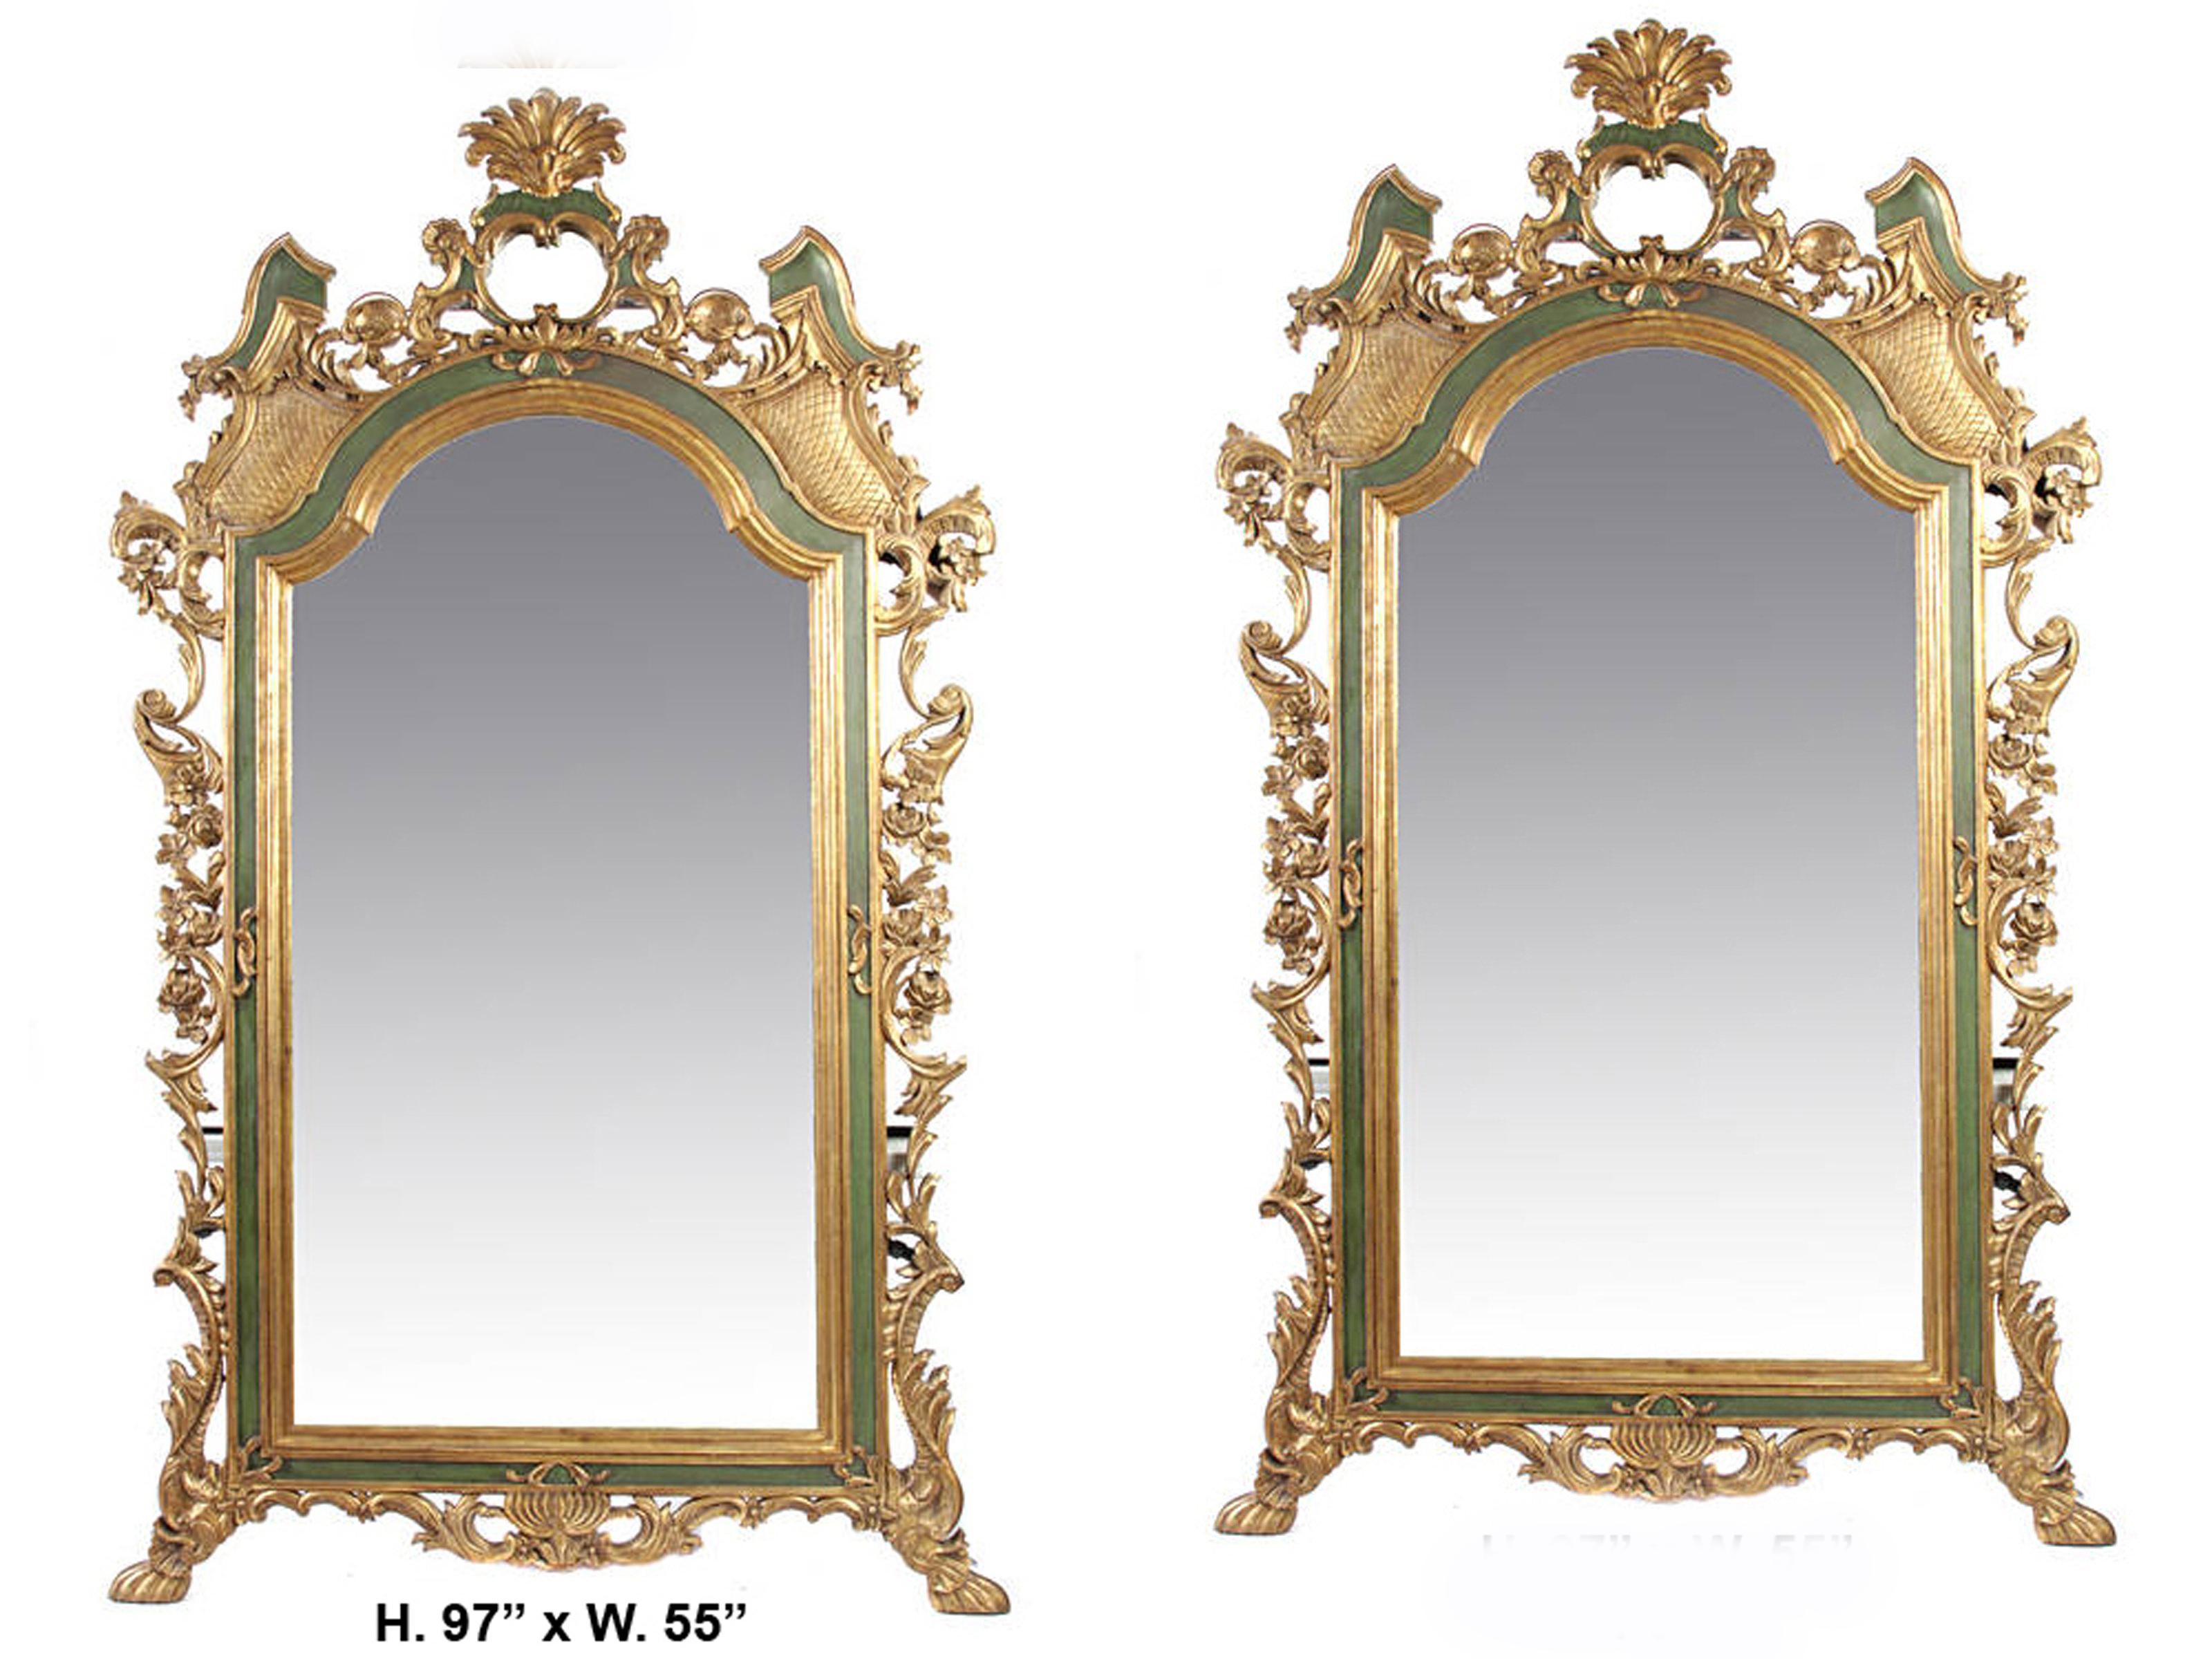 Impressive large pair of Italian Rococo style parcel gilt green painted mirrors,
first half of 20th century.

The beautiful mirrors are surmounted with a giltwood foliate palmette, over parcel gilt and green painted Rocaille motif crown with